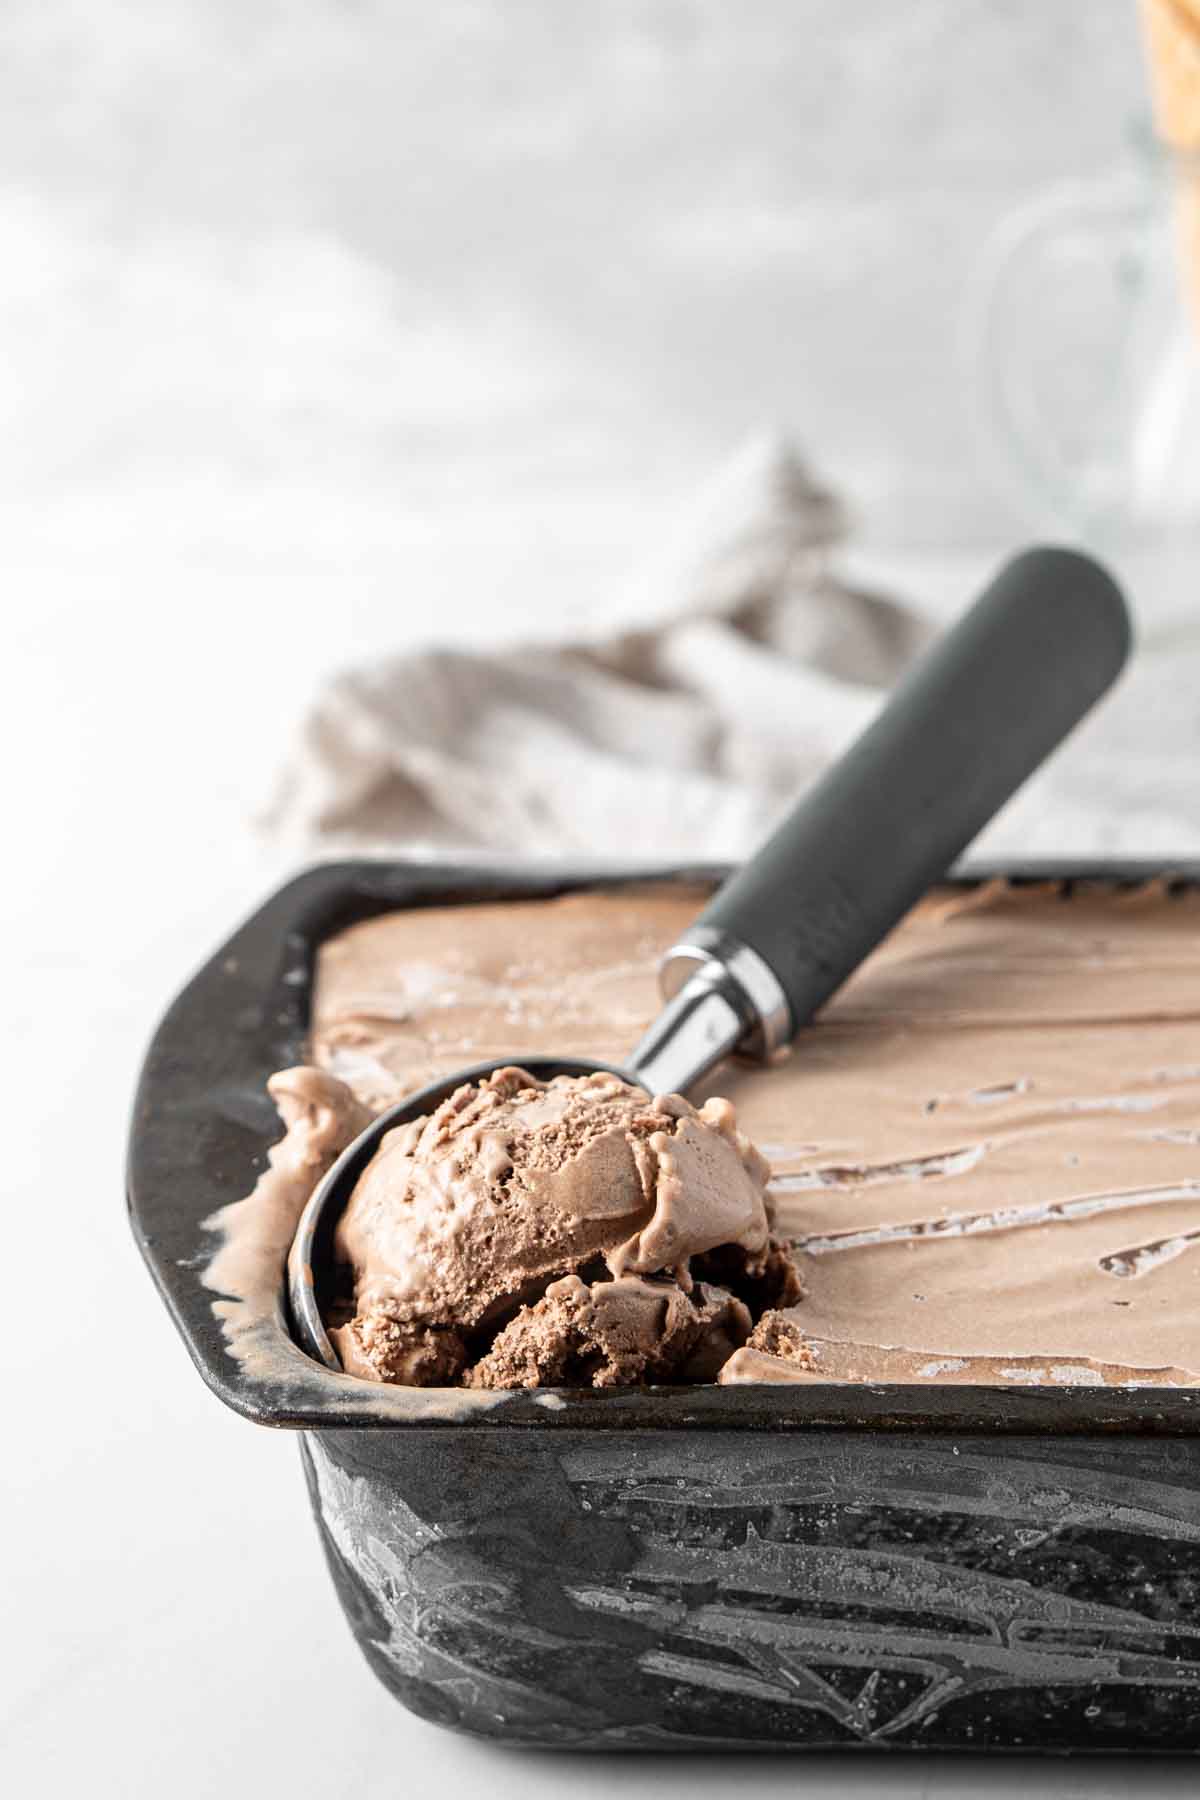 A scoop of chocolate rocky road ice cream.